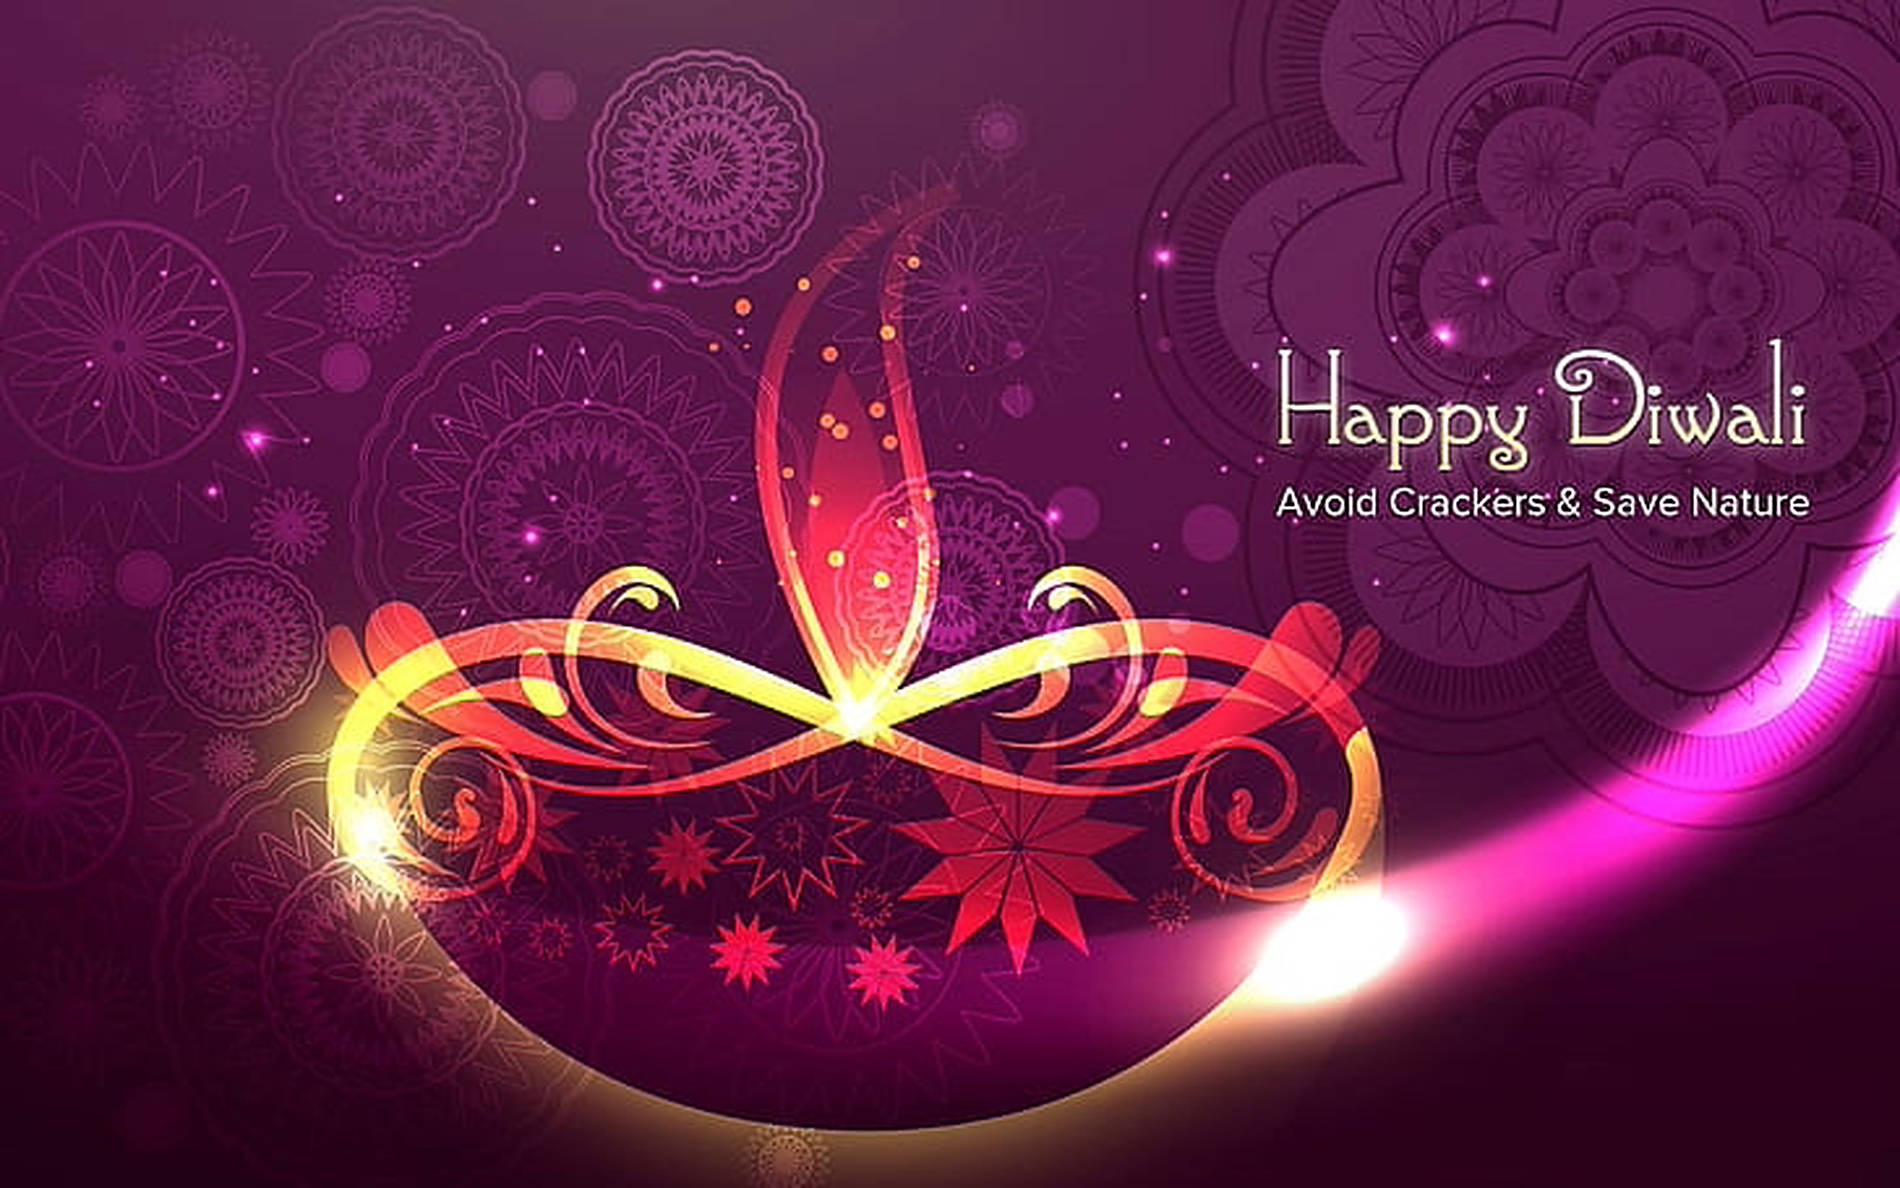 Beautiful Digital Poster Of A Brilliant Diya For Diwali, With Floral Designs And Neon Pink Flares On A Violet Background.